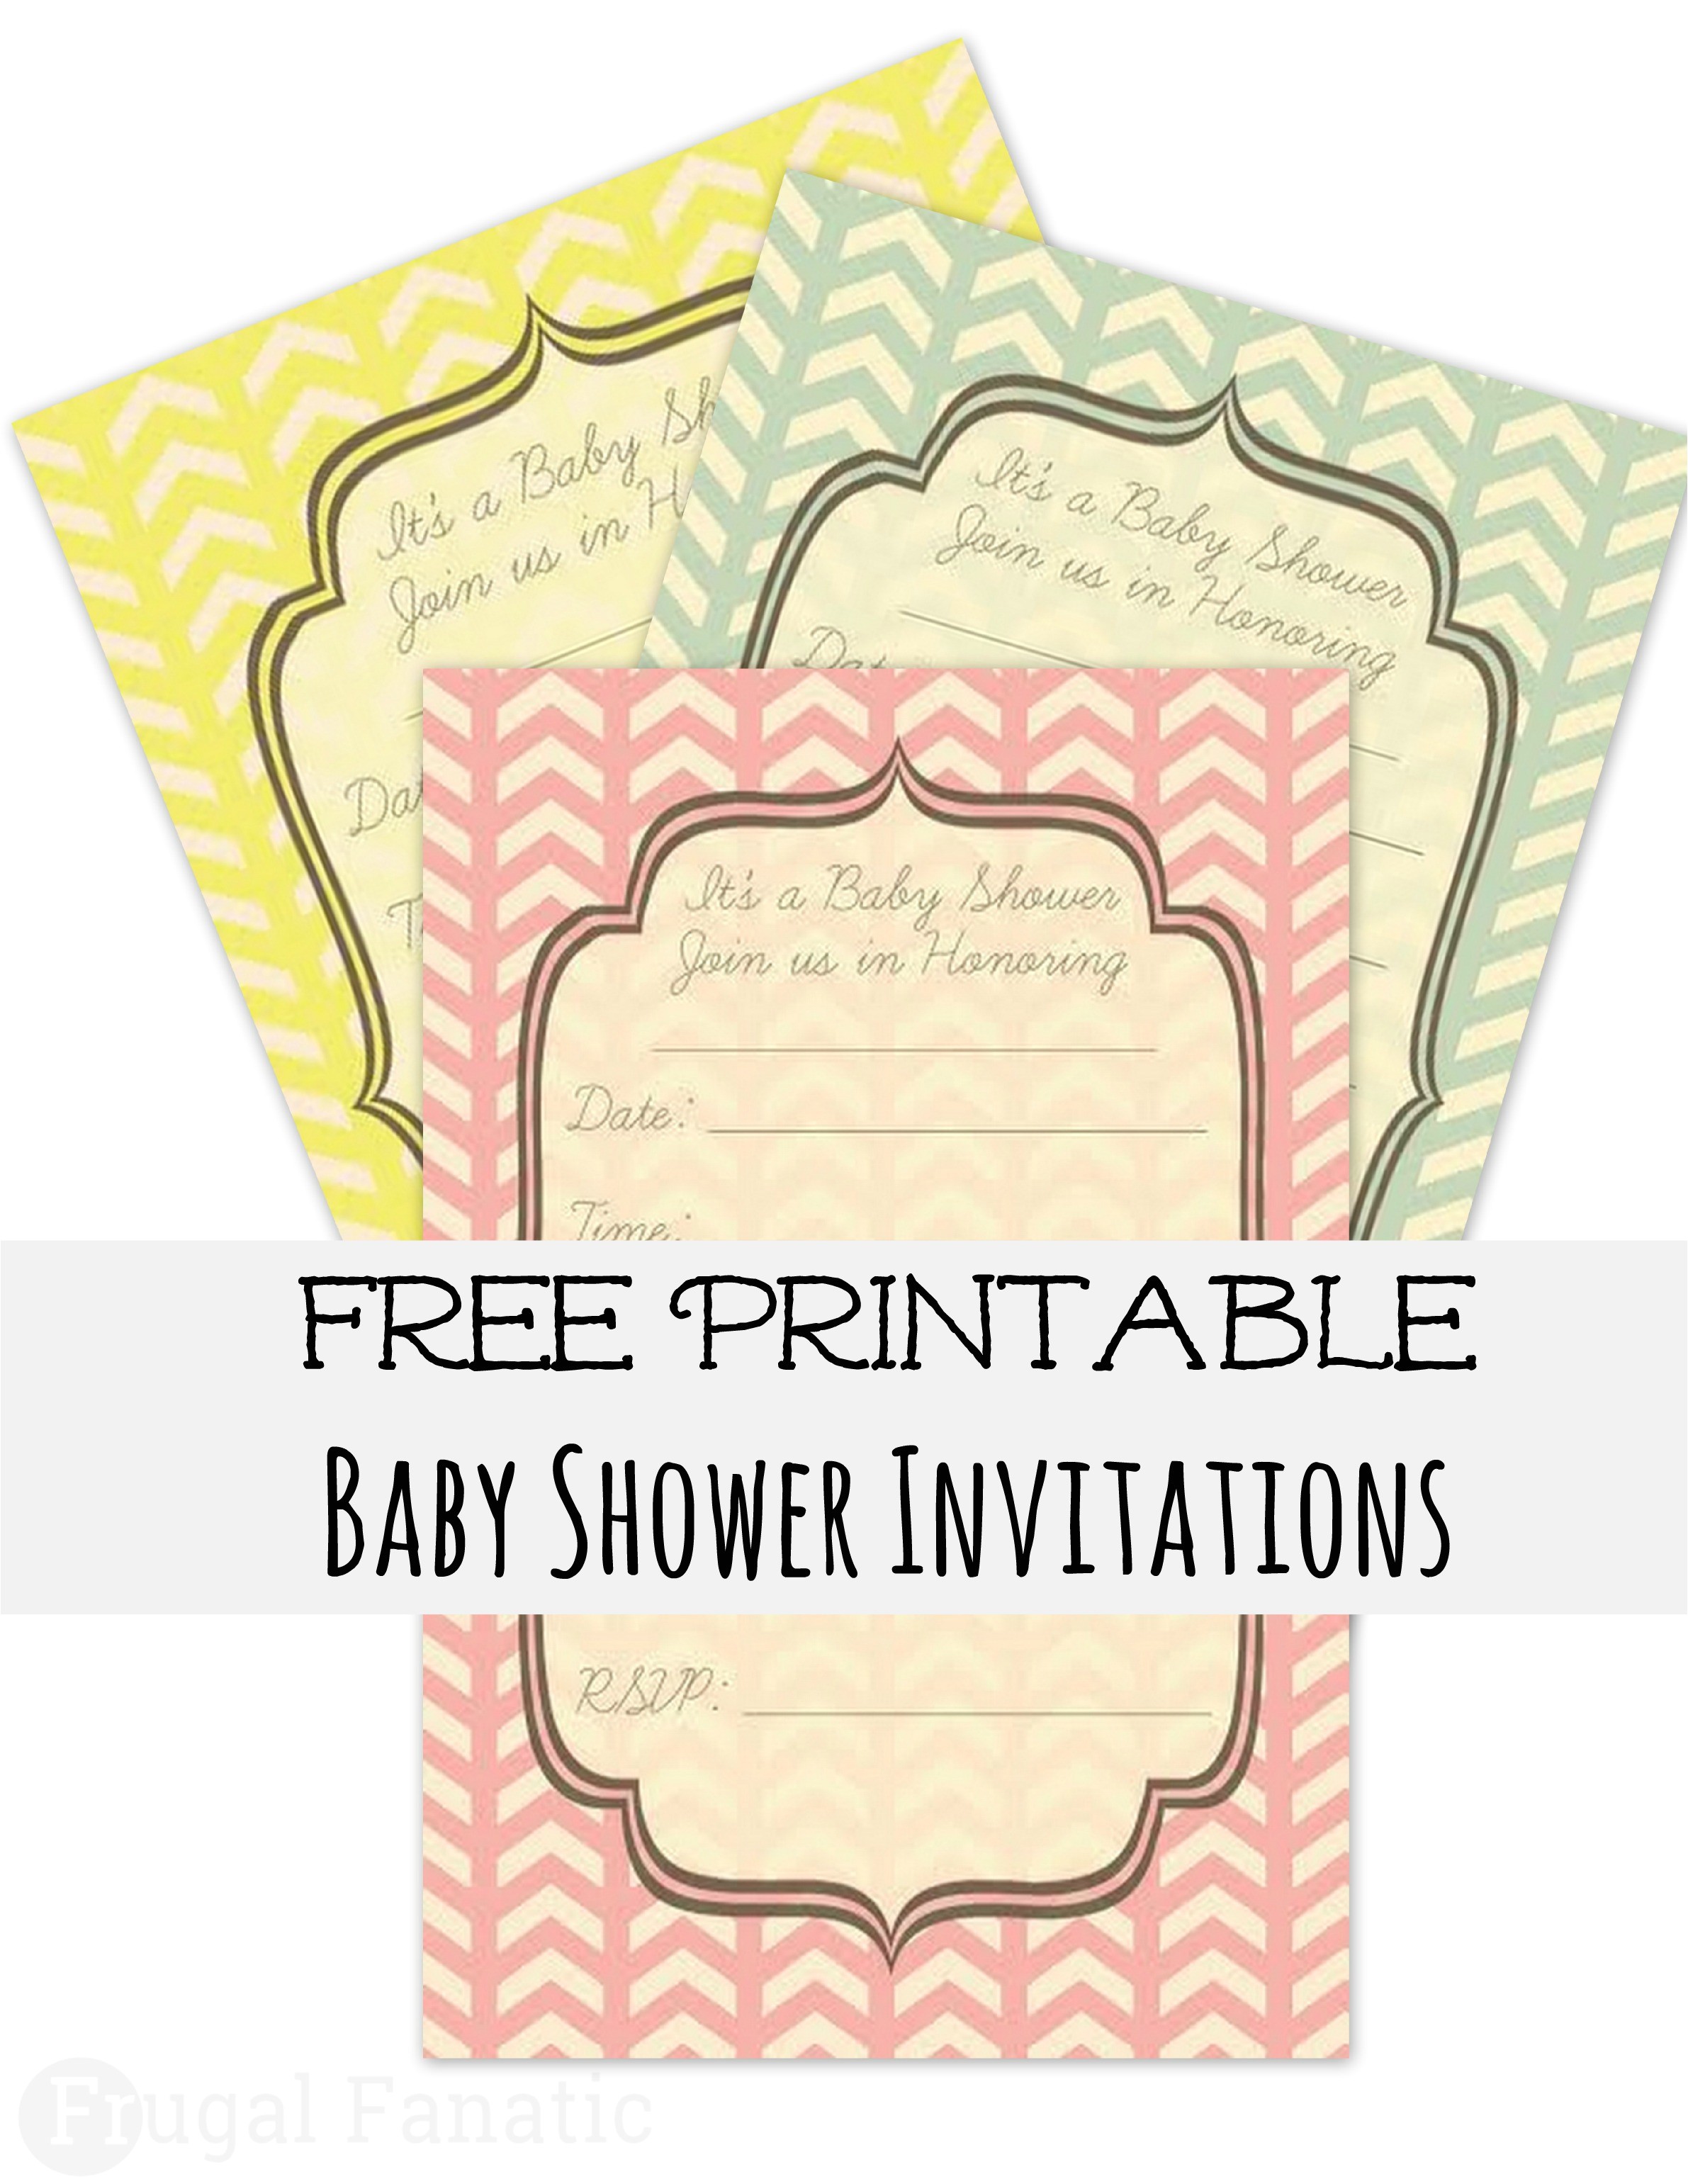 Make Free Baby Shower Invitations Baby Shower Invitations Create Your Own Free